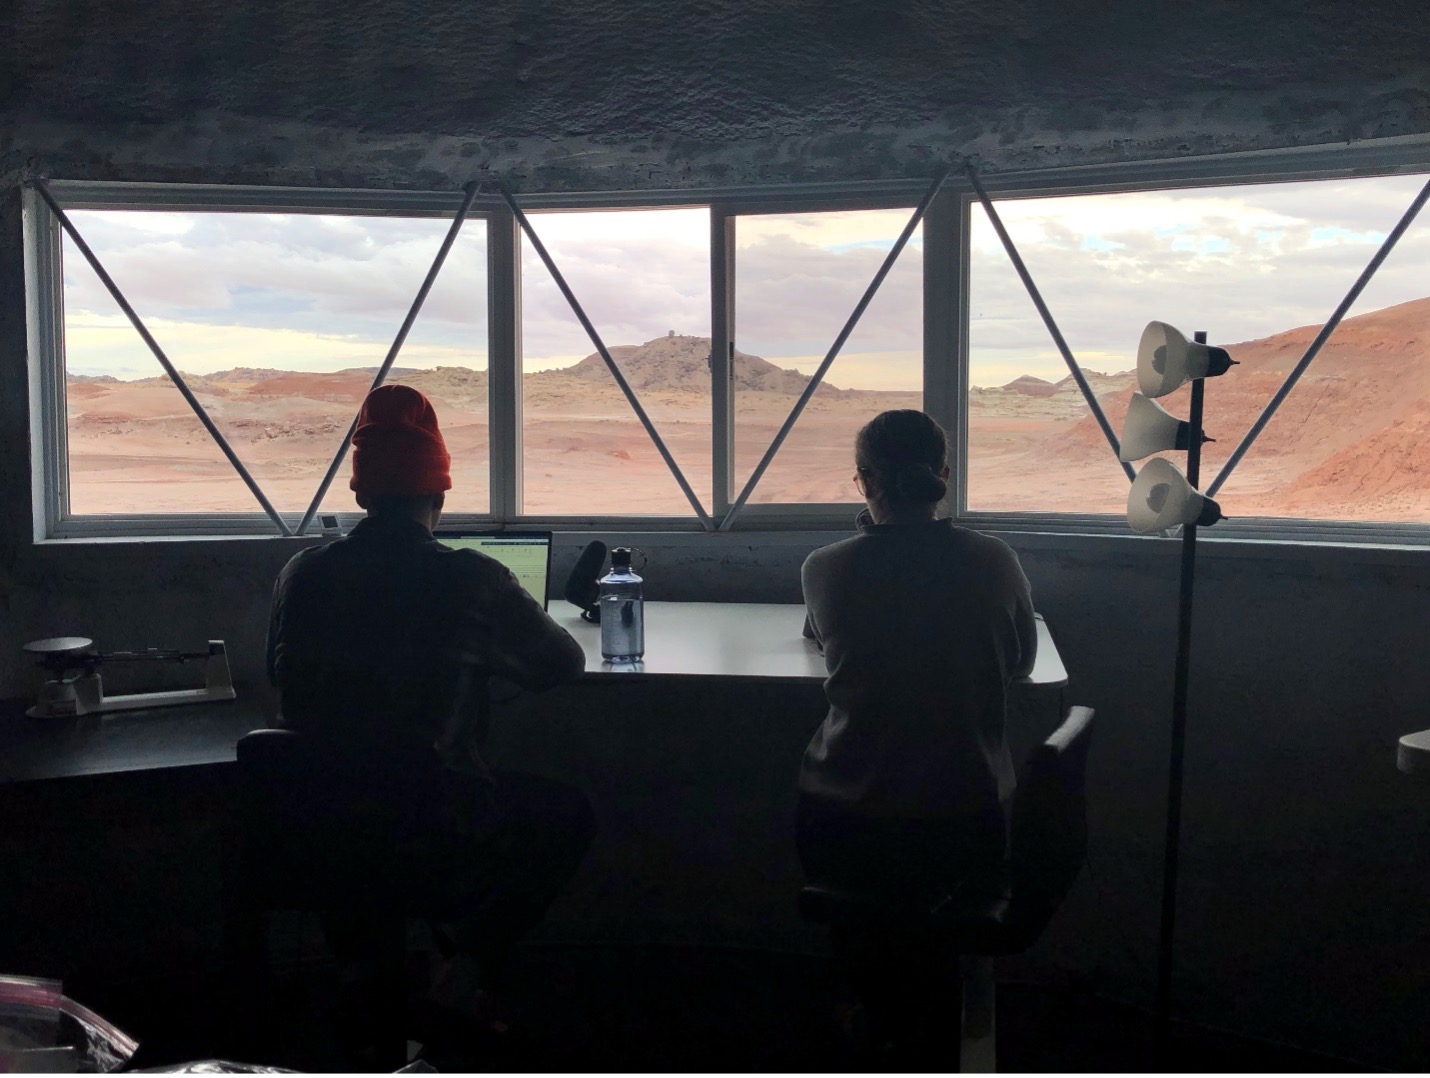 The view from the window of the science dome, where many crew members sought quiet time to get work done.